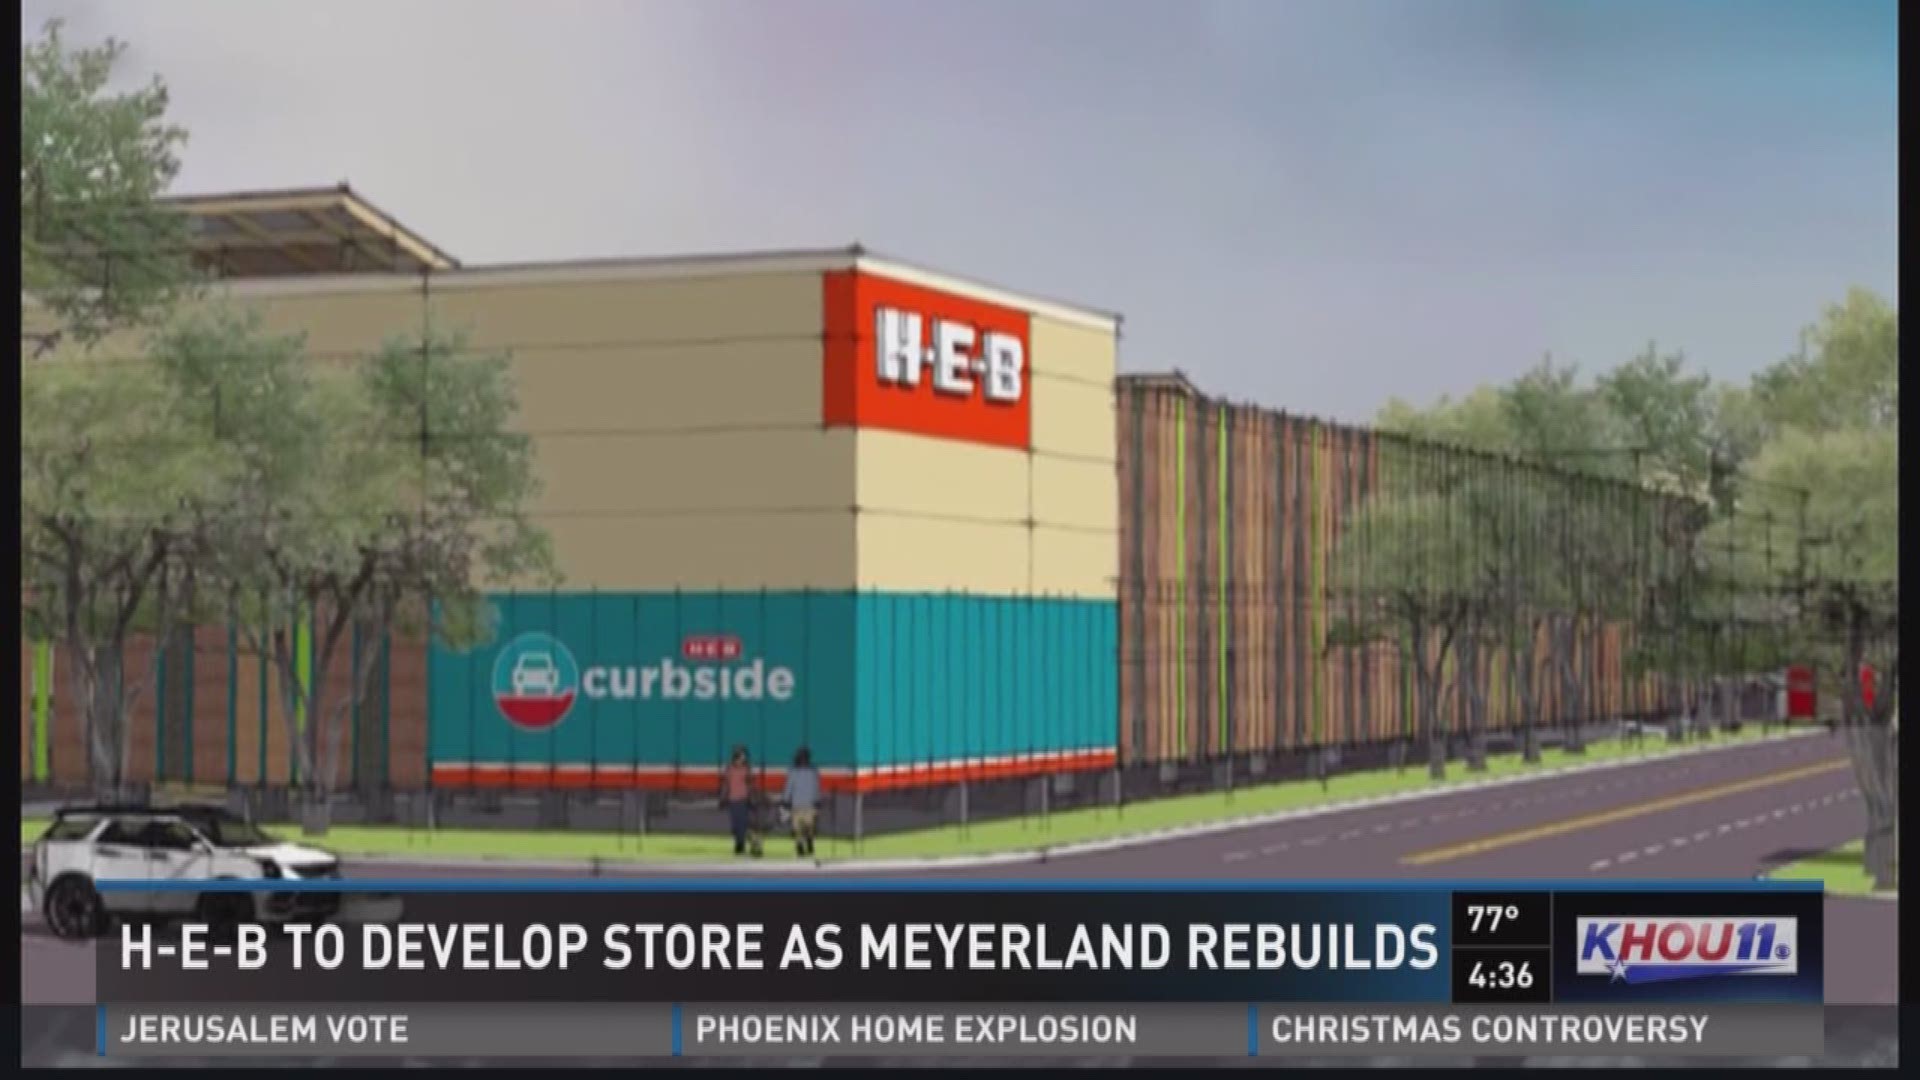 H-E-B is developing a replacement store for the Meyerland neighborhood in Meyerland Plaza.